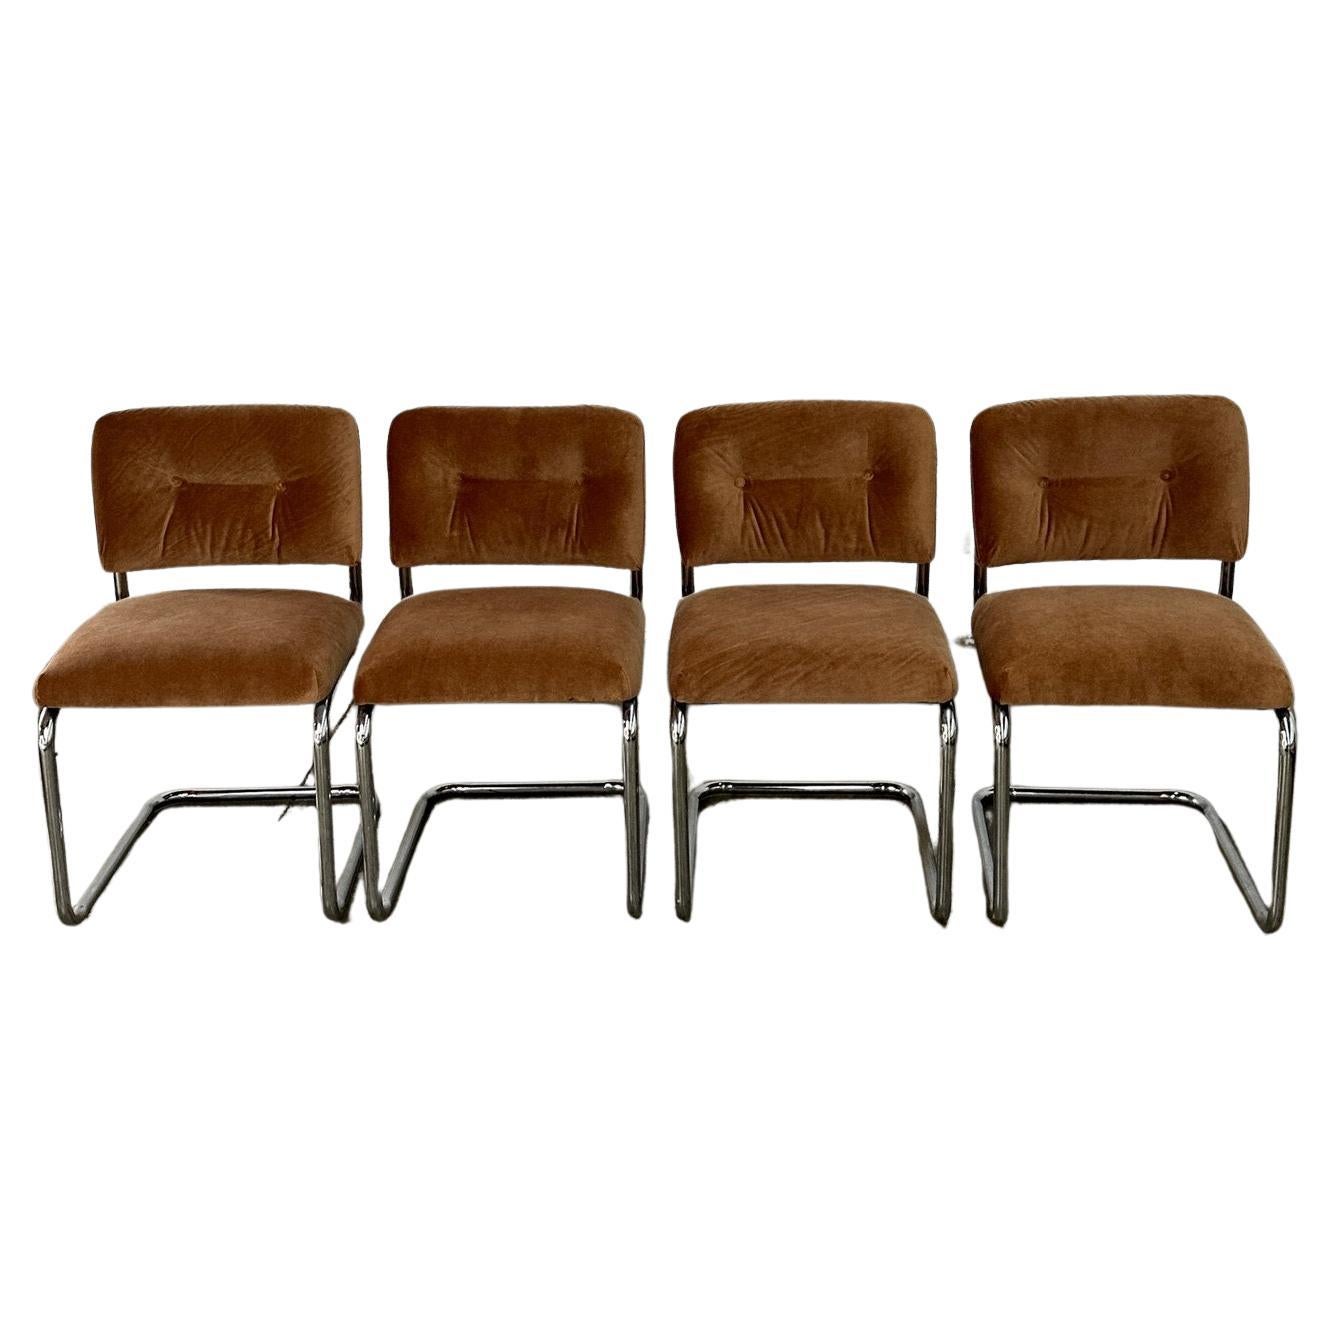 Cantilevered dining chairs - set of four